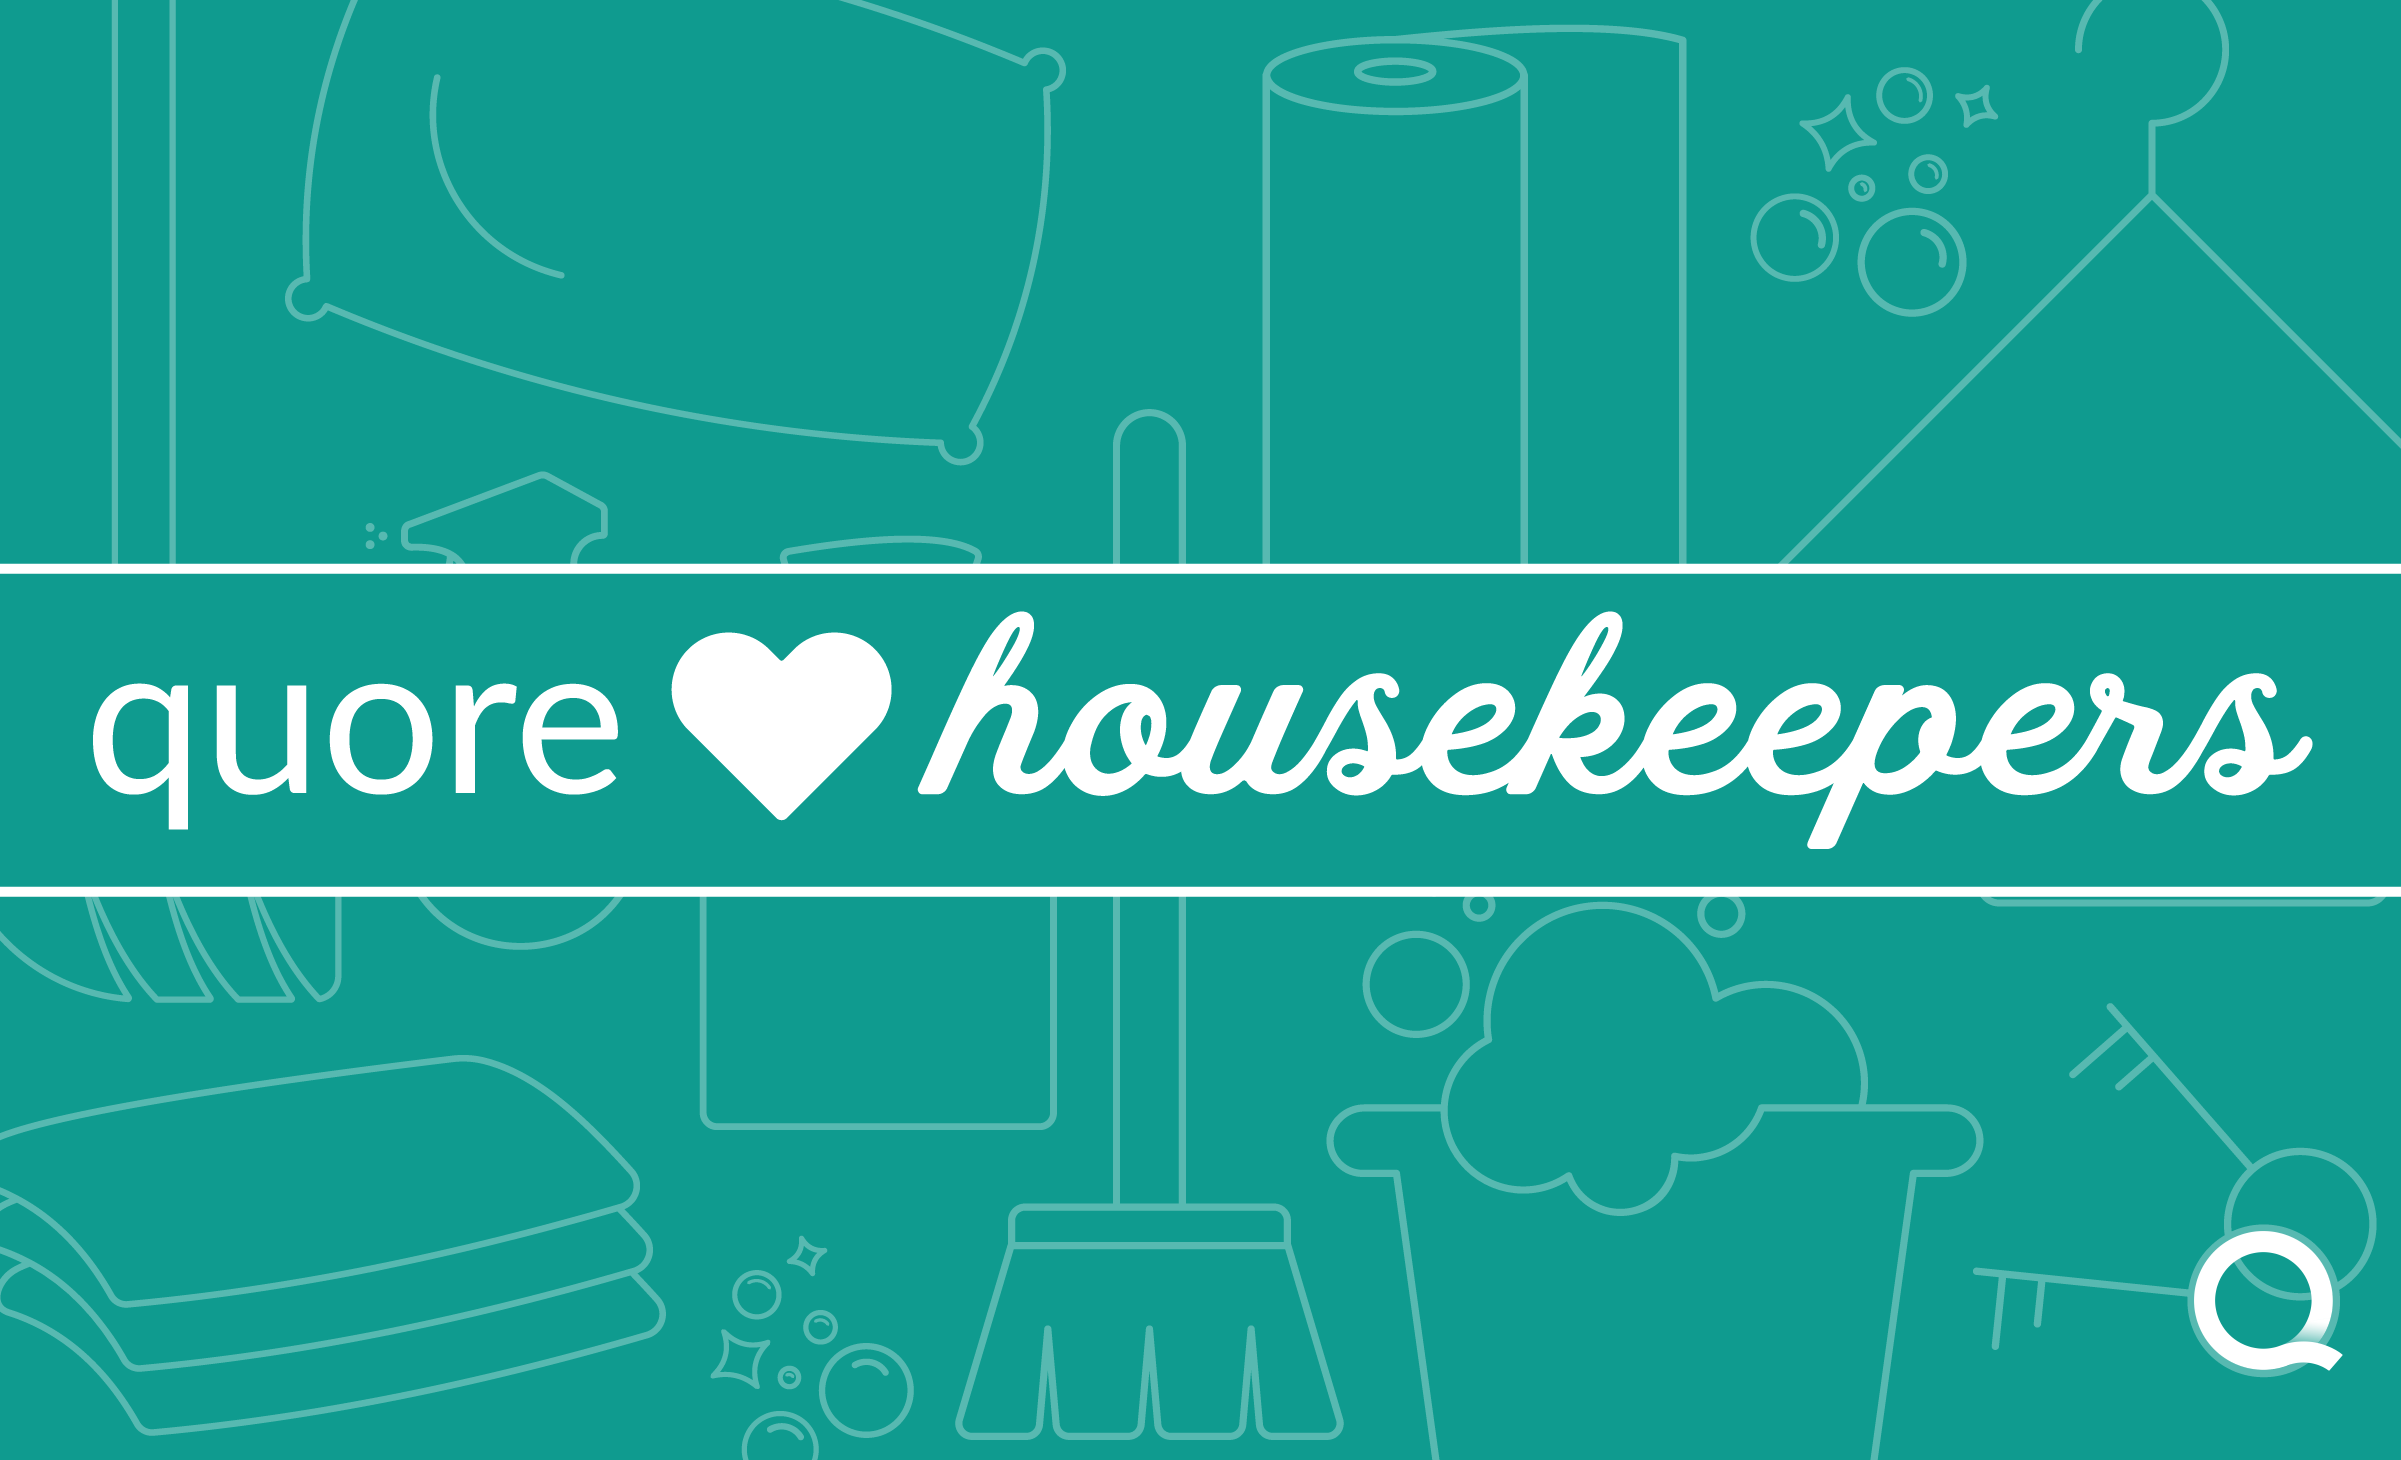 5 Ways Quore Supports Housekeepers